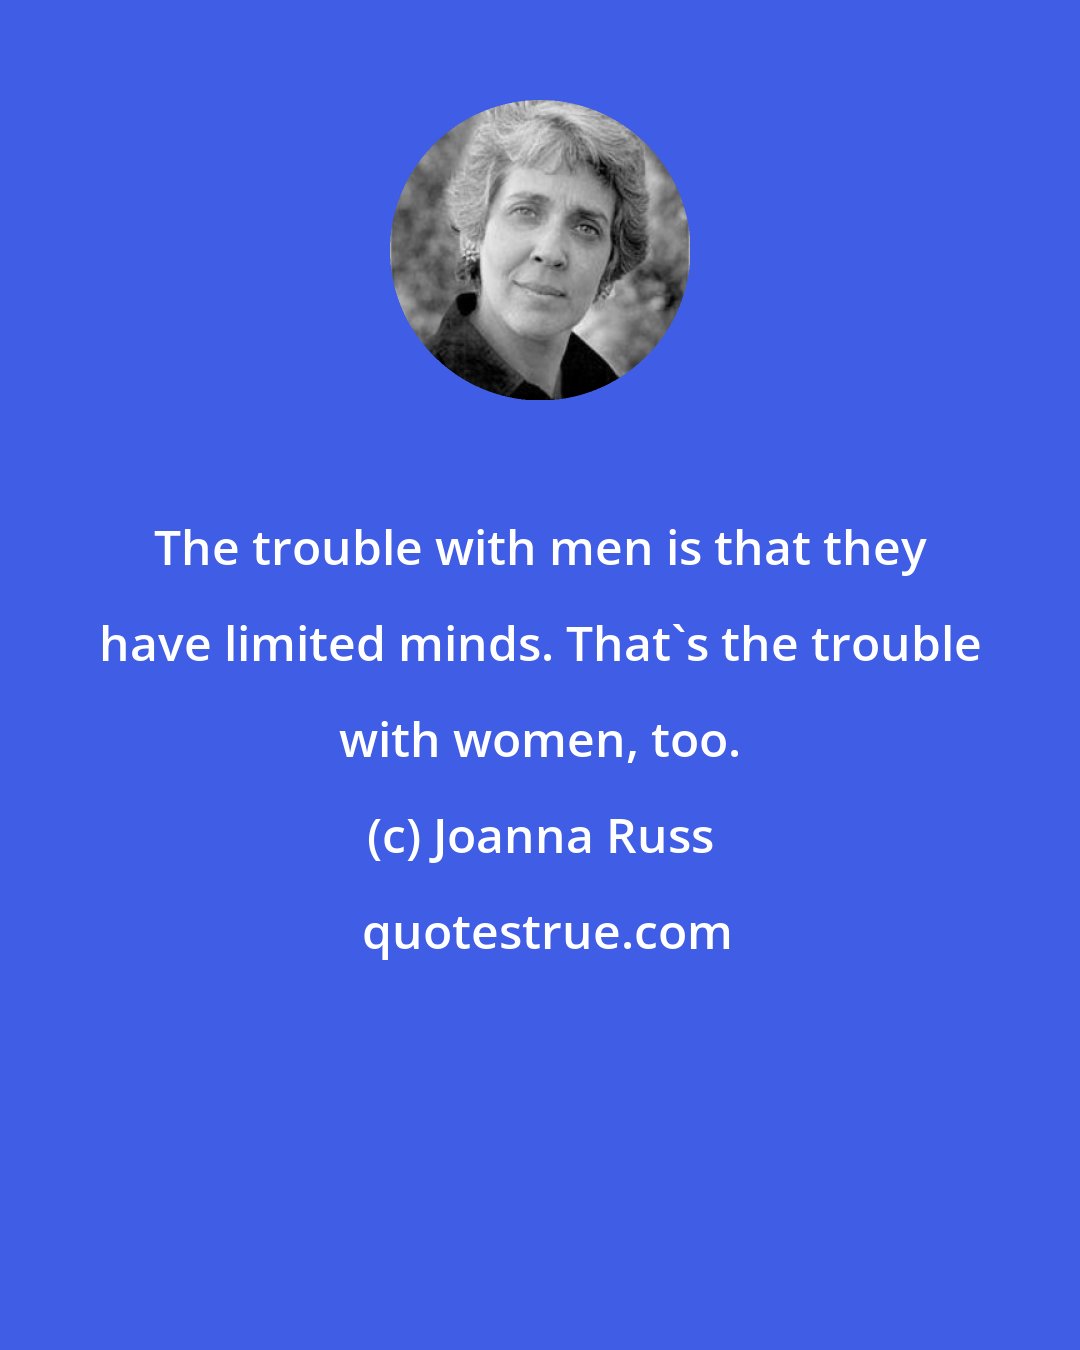 Joanna Russ: The trouble with men is that they have limited minds. That's the trouble with women, too.